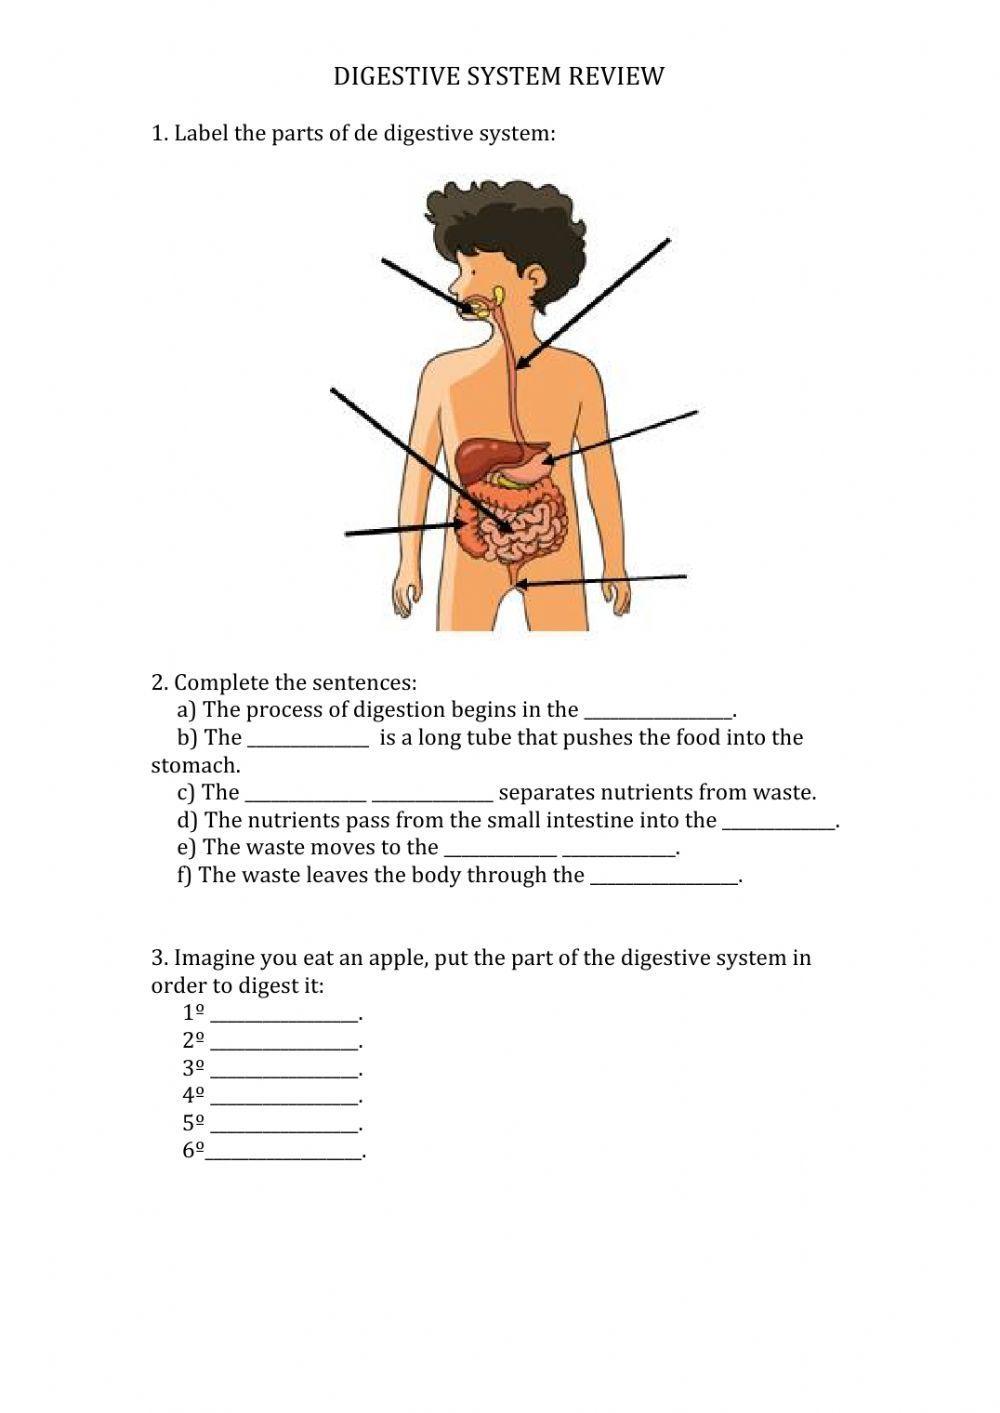 Digestive system review